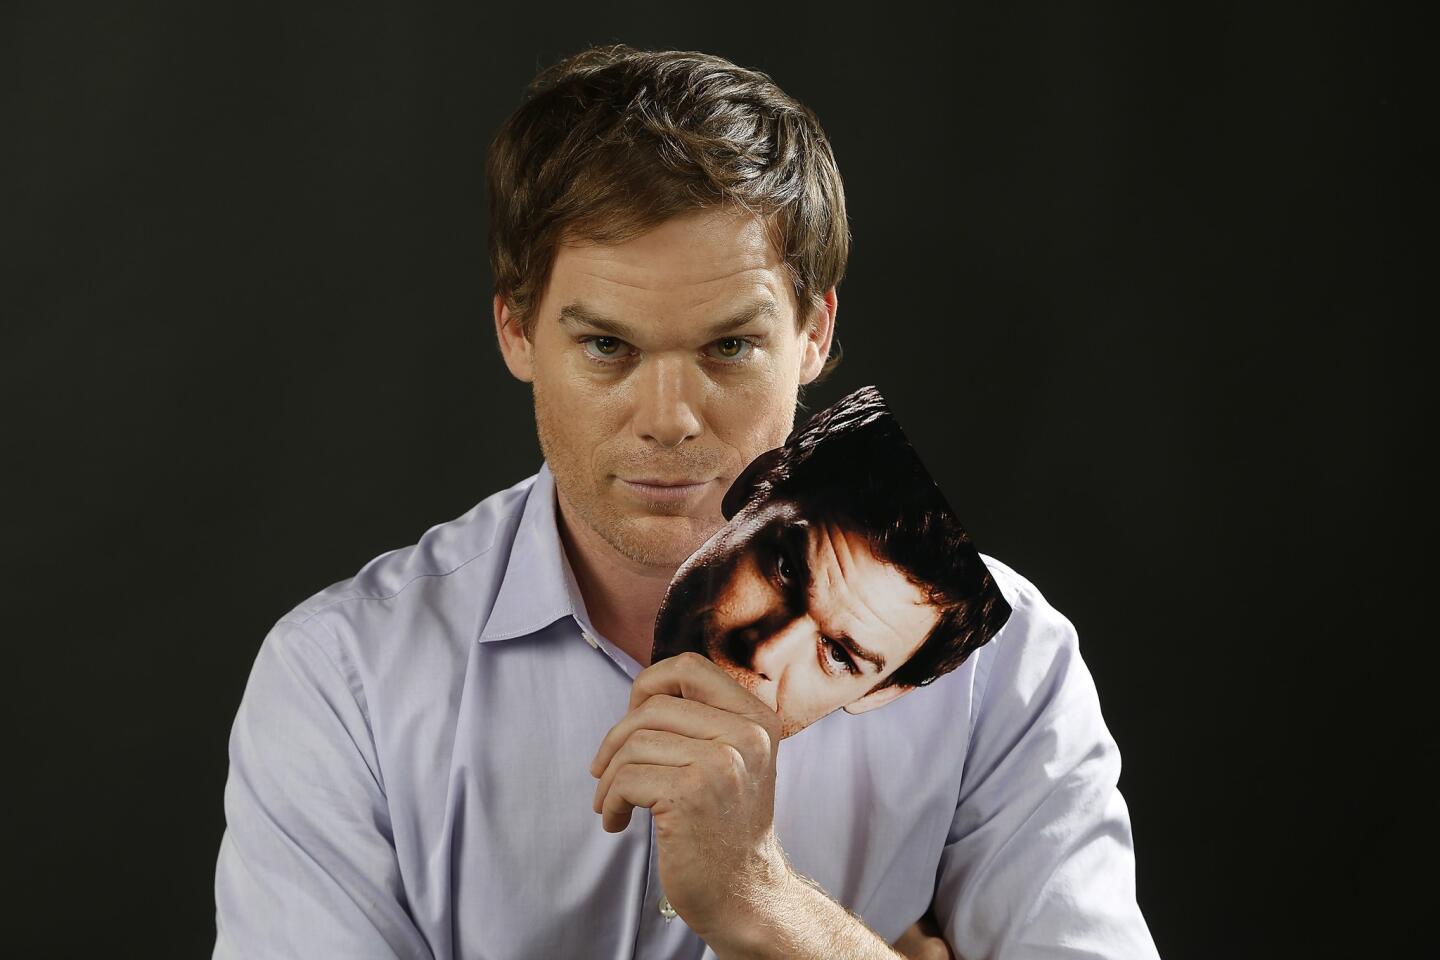 Actor Michael C. Hall plays the coolly charming psychopath at the center of Showtime's "Dexter," set to conclude Sunday after an eight-season run.